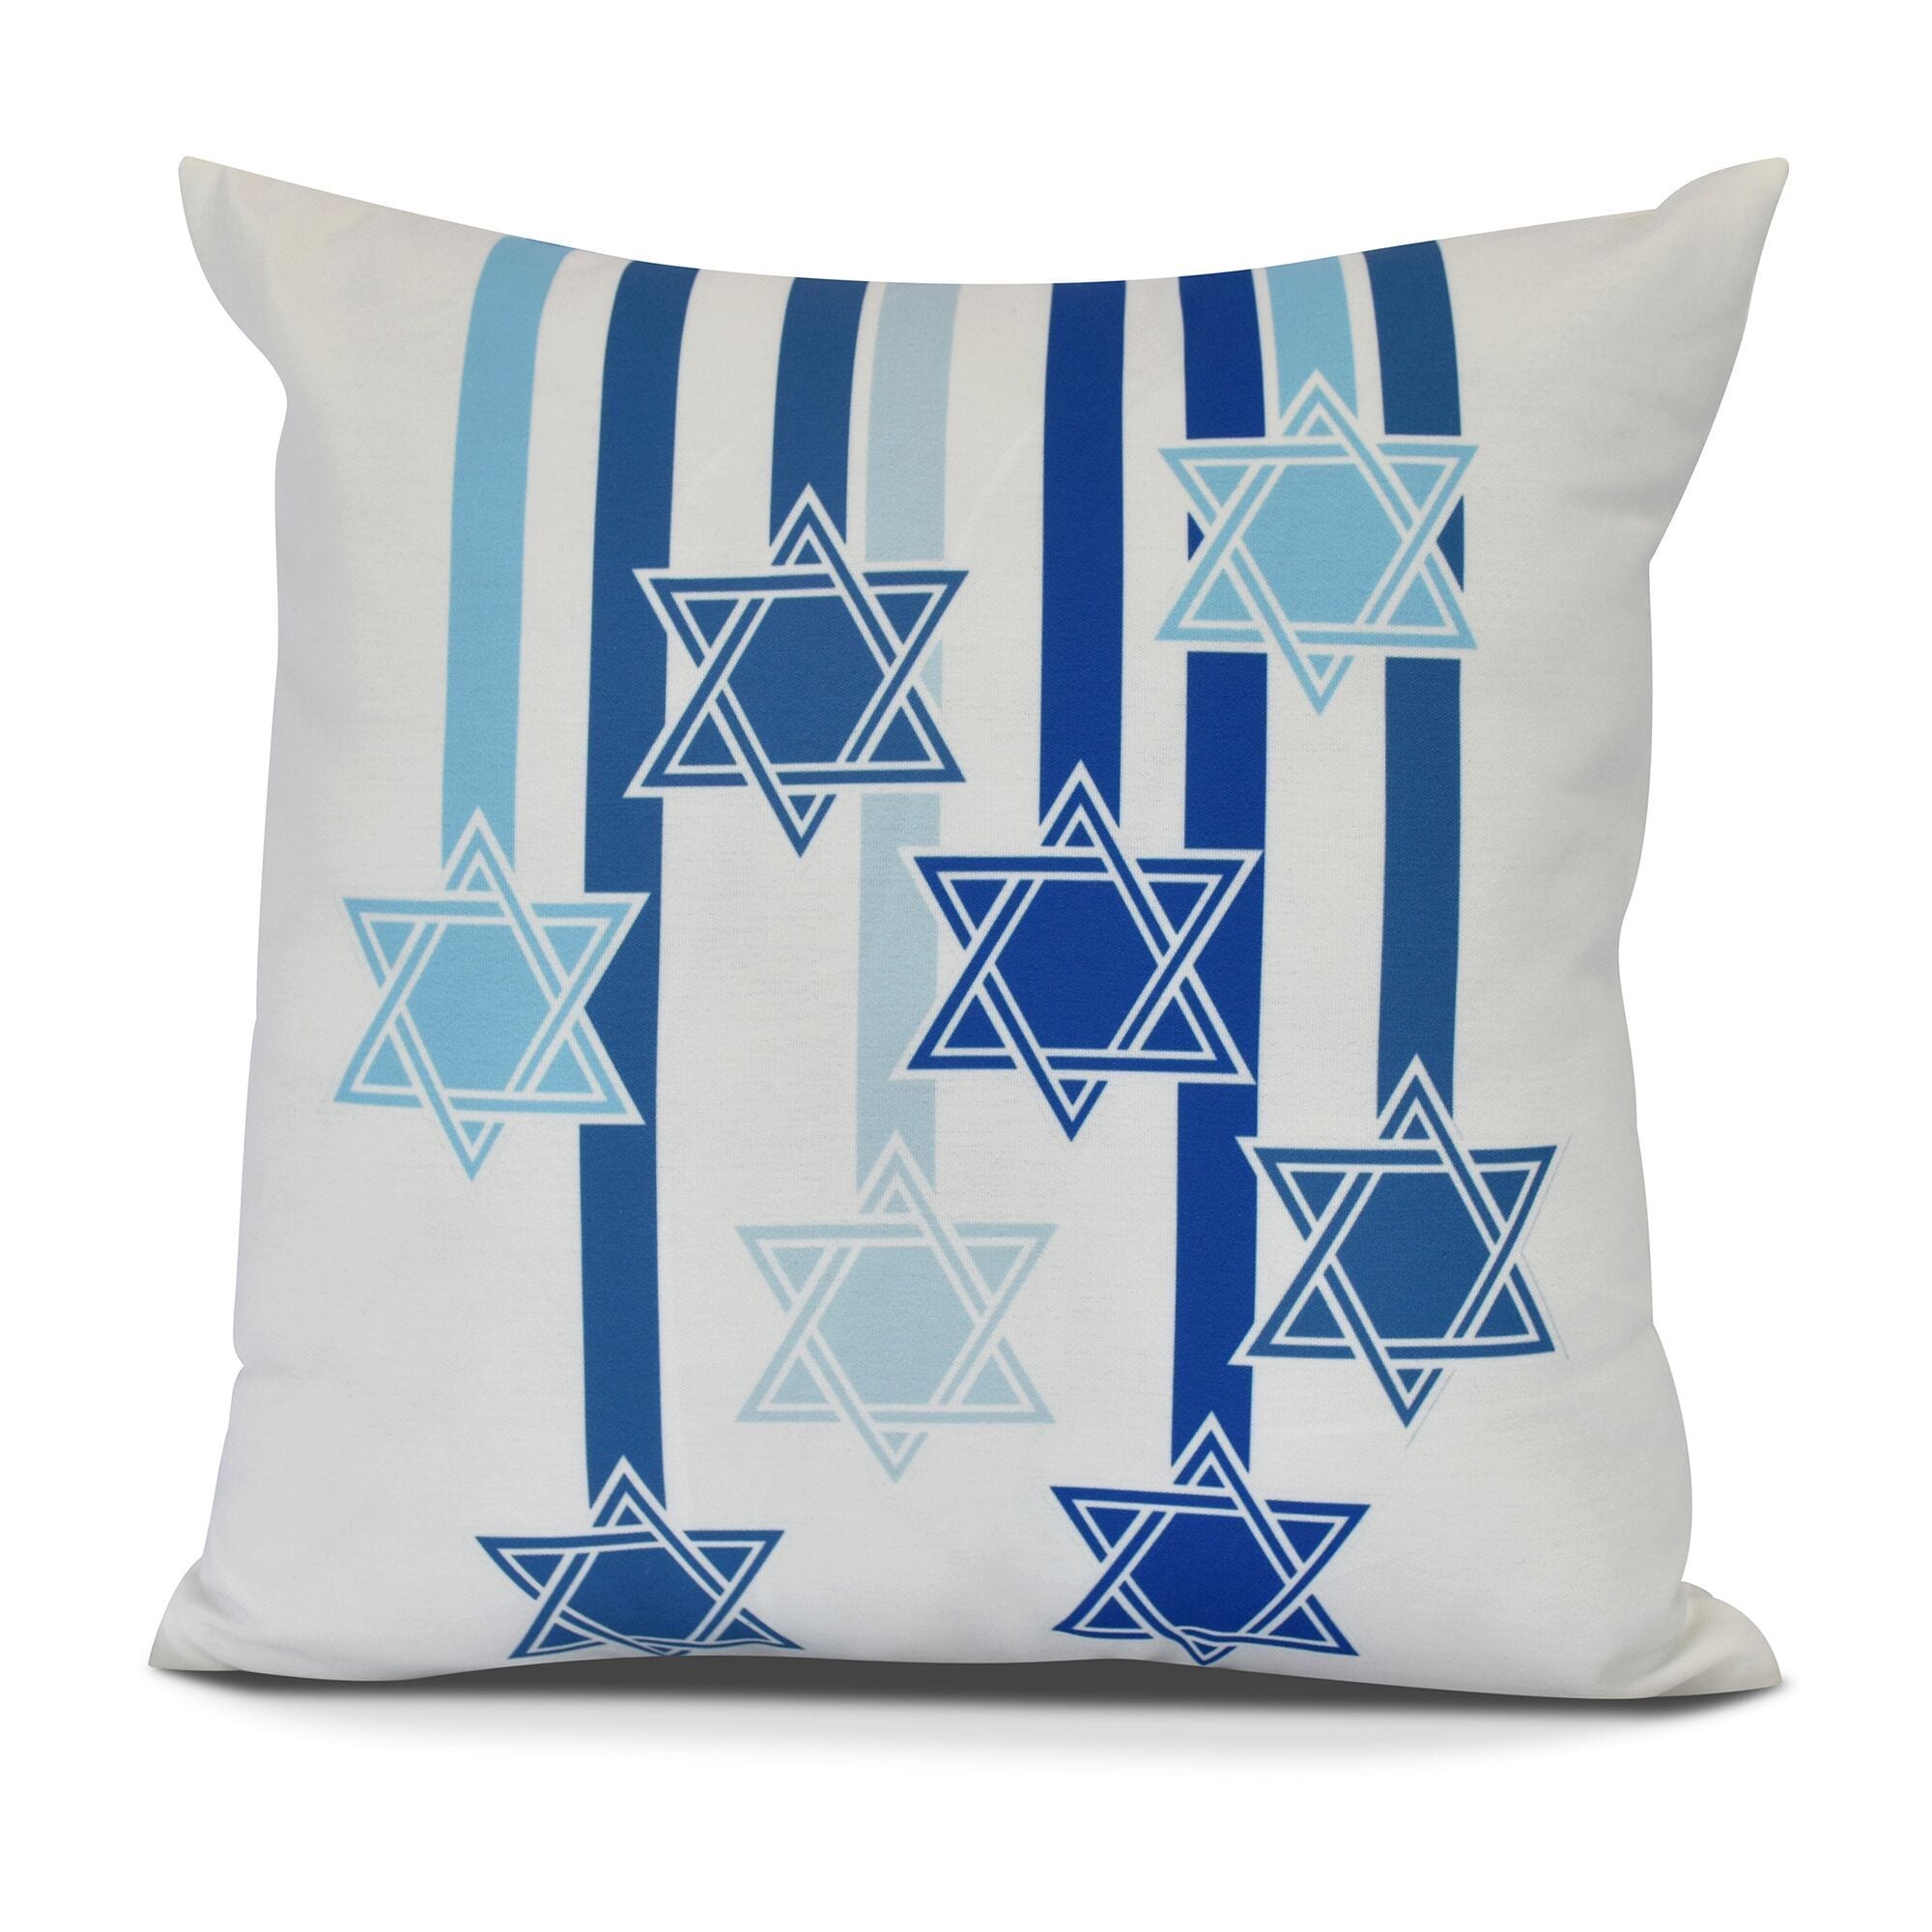 Simply Daisy, Shooting Stars Geometric Print Outdoor Pillow - image 2 of 2